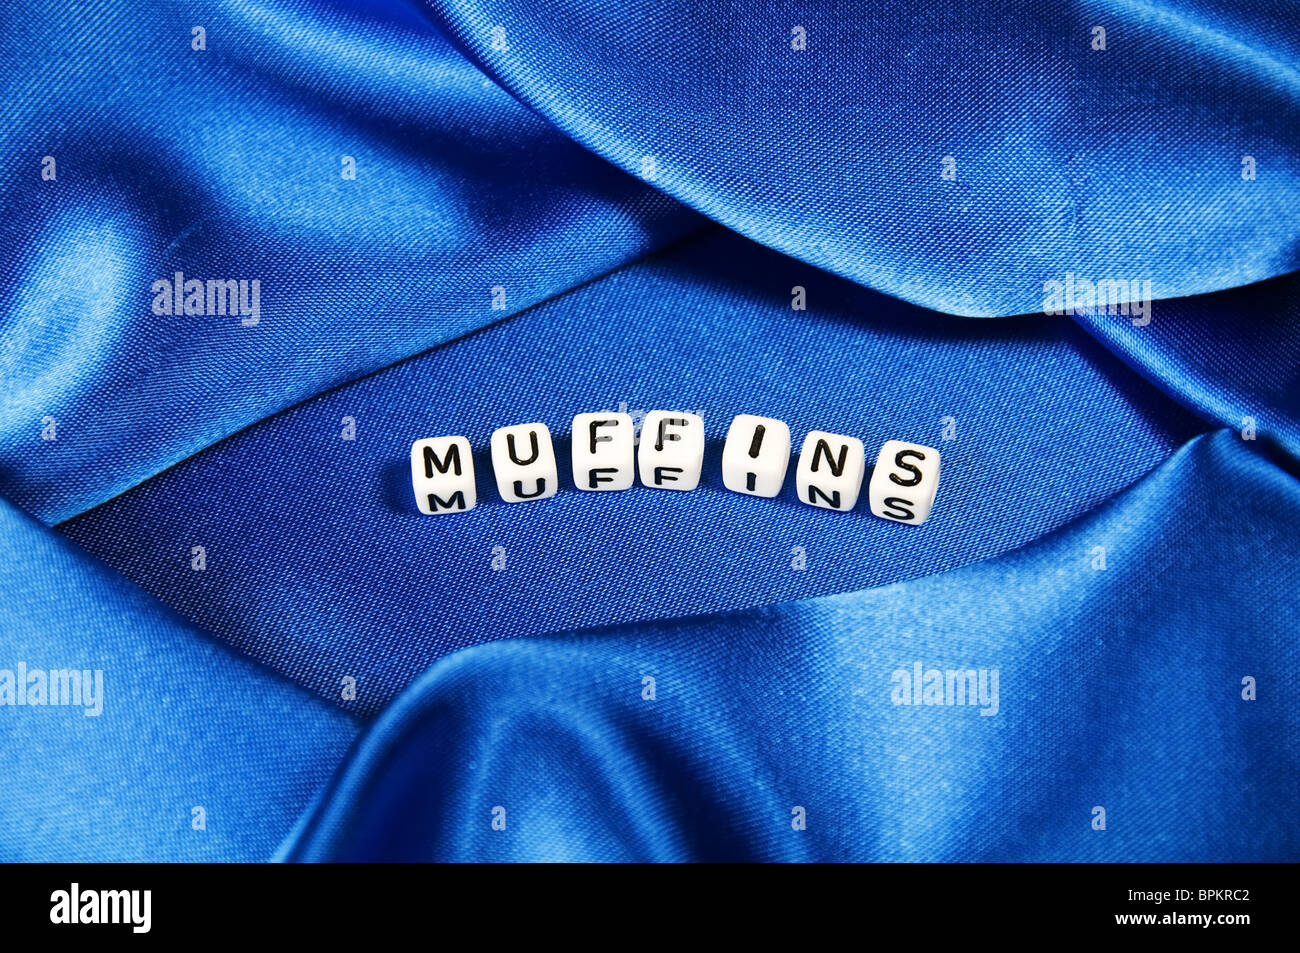 This series has a deep royal blue satin shiny background with the word muffins in  cube lettering in this cooking series. Stock Photo